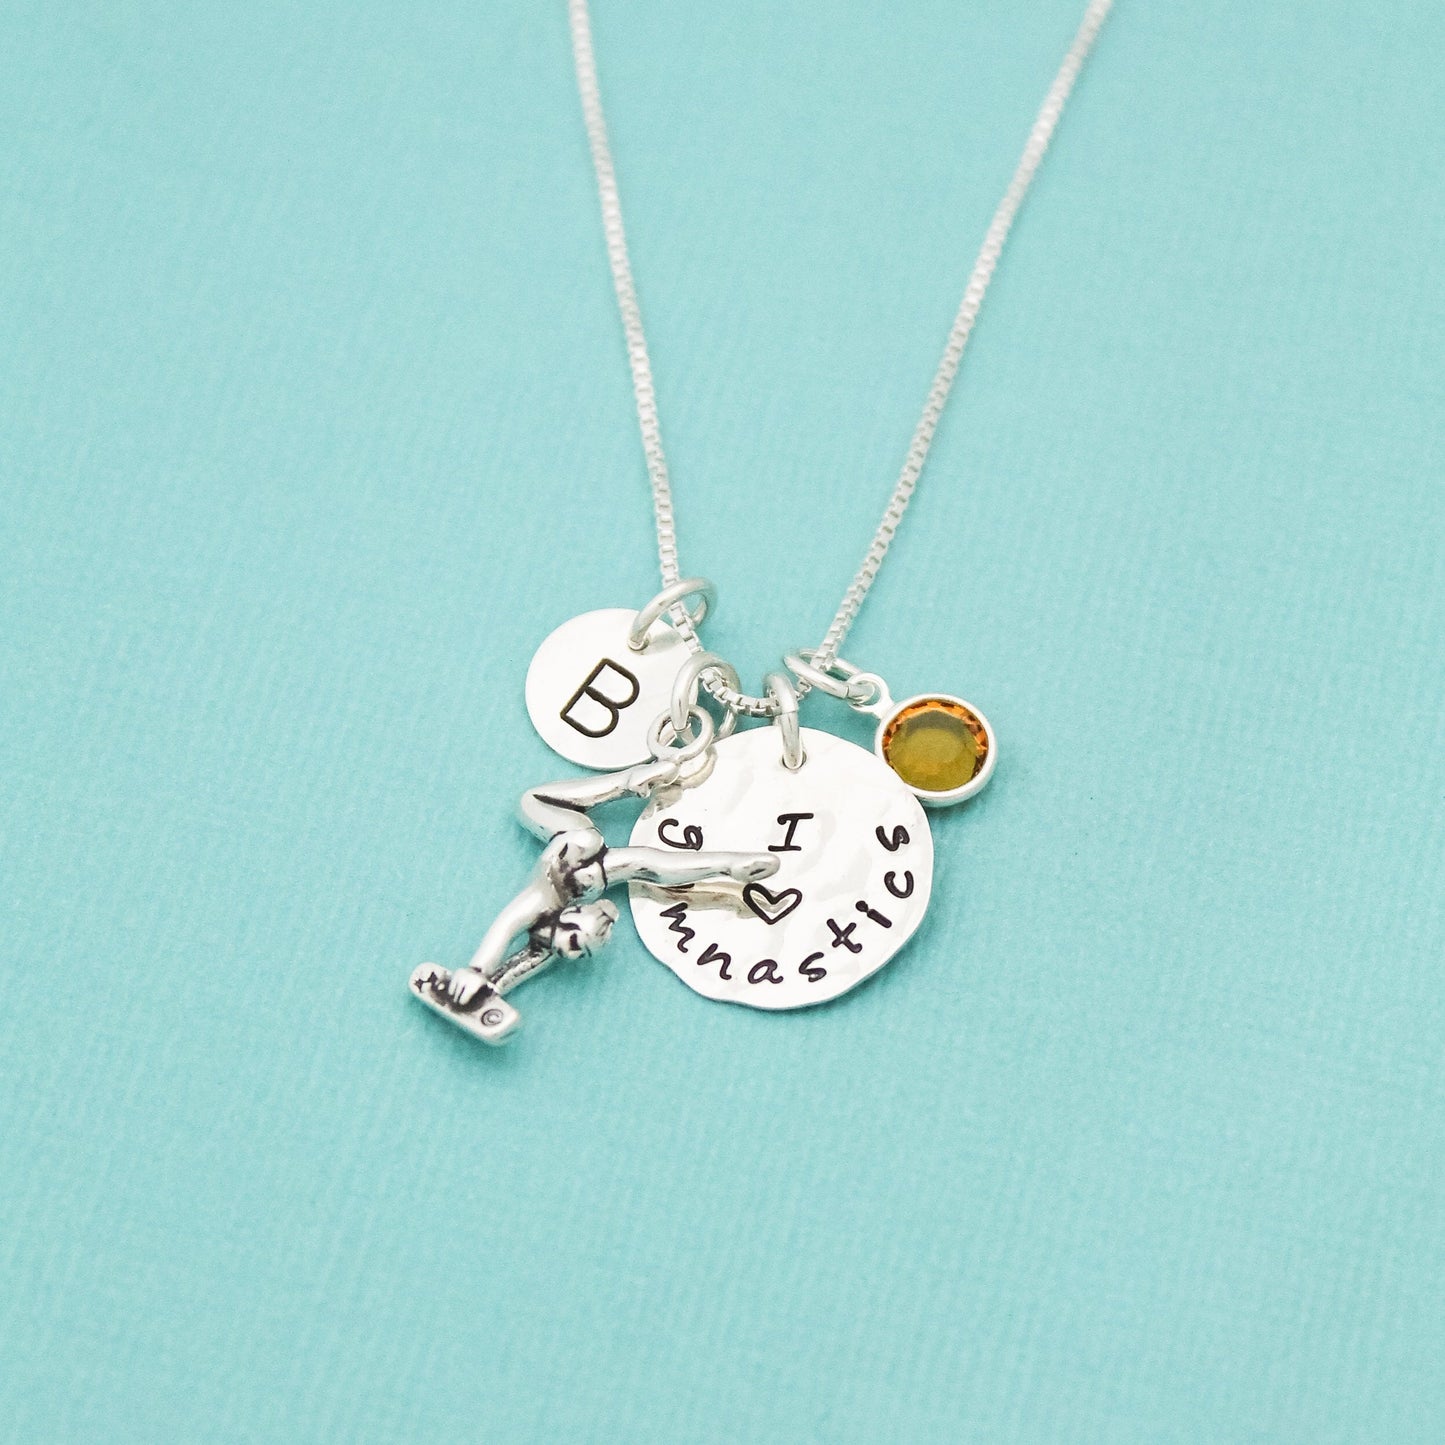 Sterling Silver Gymnastics Necklace with Crystal Birthstone and Initial Personalized Hand Stamped Necklace, Gymnast Sports Necklace